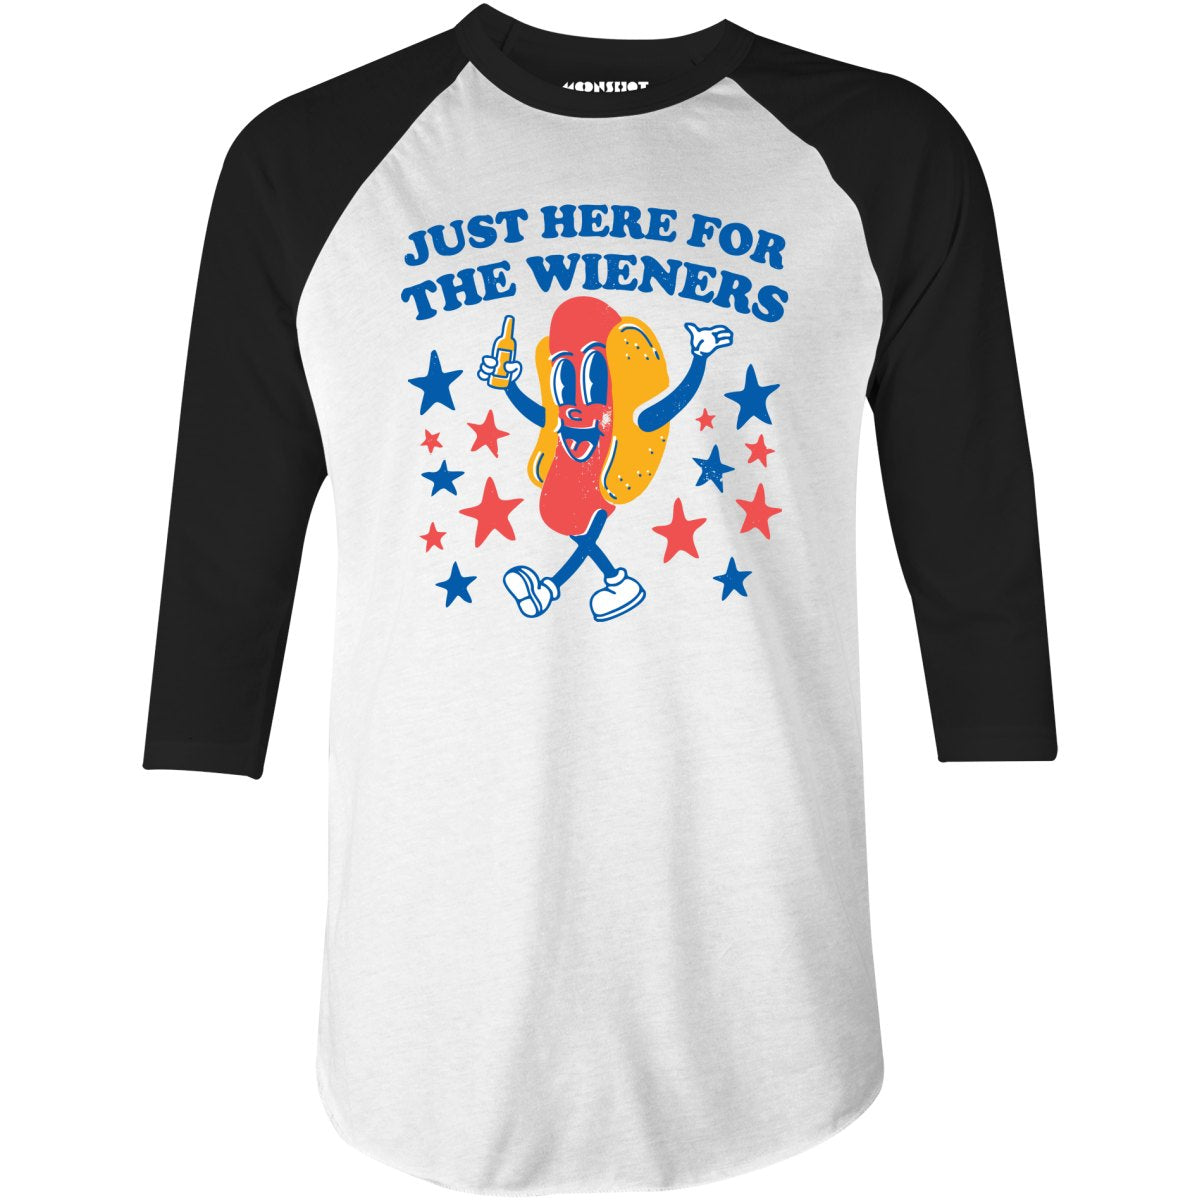 Just Here For The Wieners - 3/4 Sleeve Raglan T-Shirt